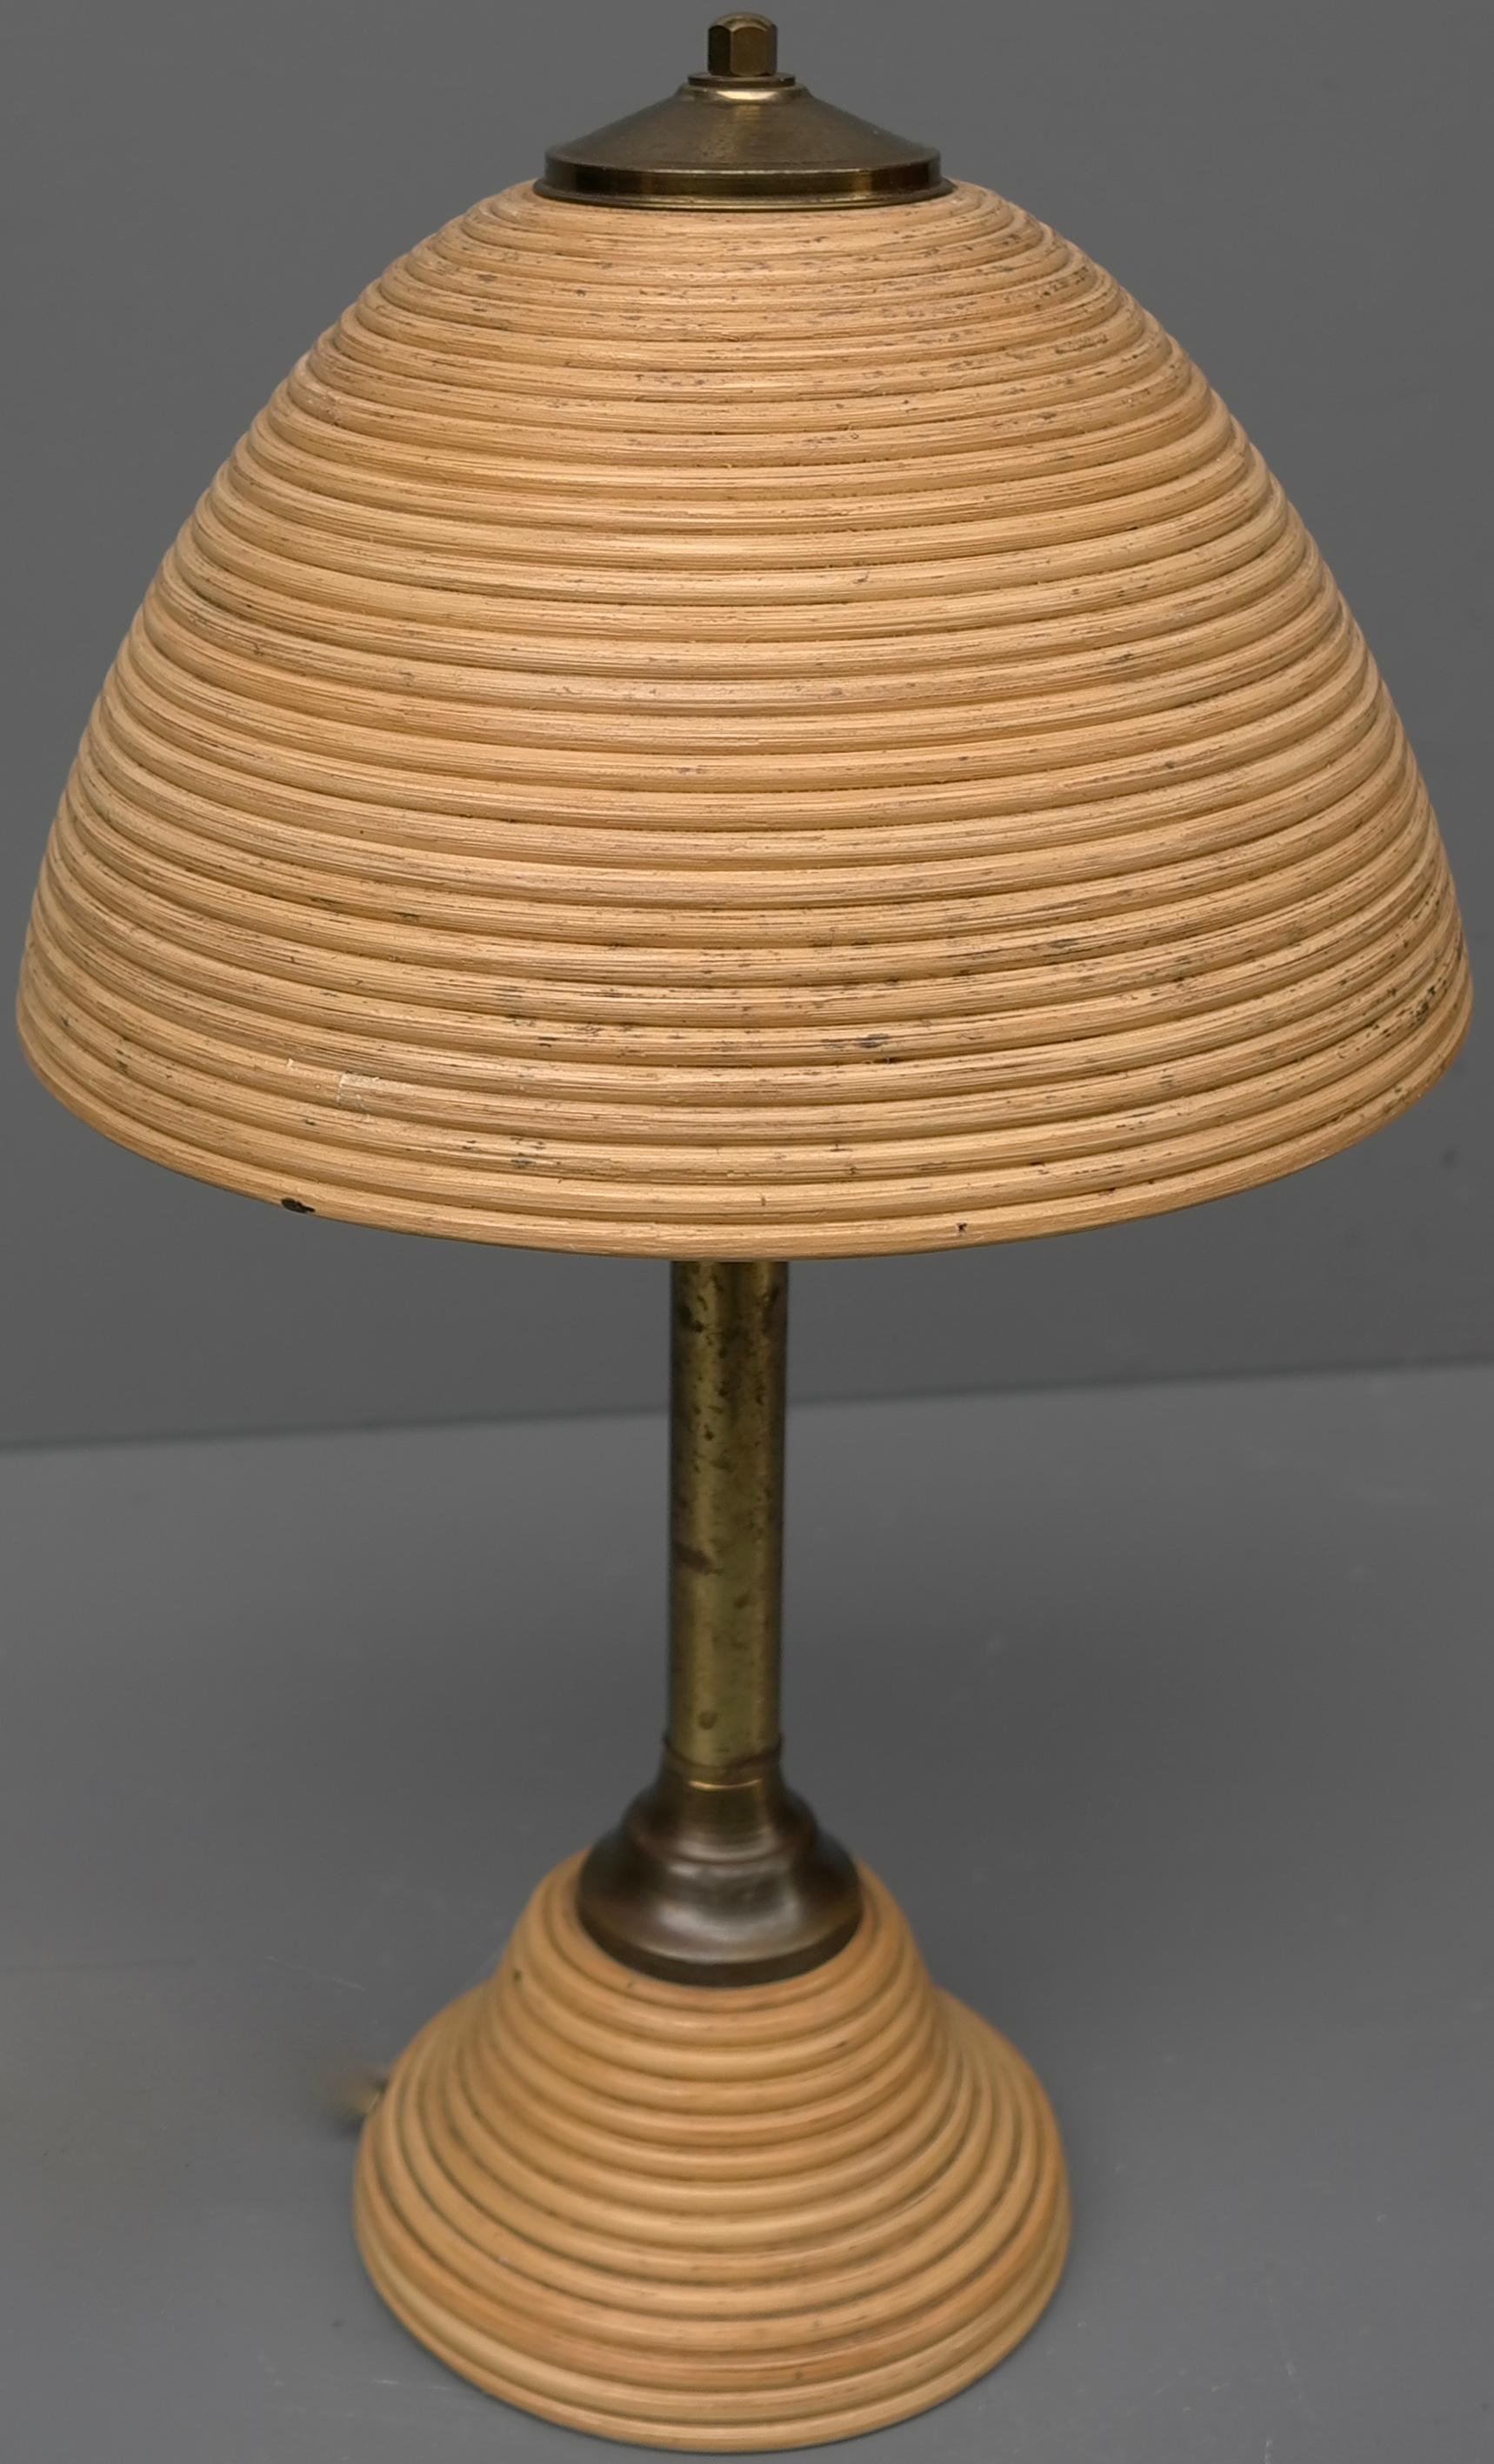 European Mid-Century Modern Table Lamp in Wood, Bamboo and Brass